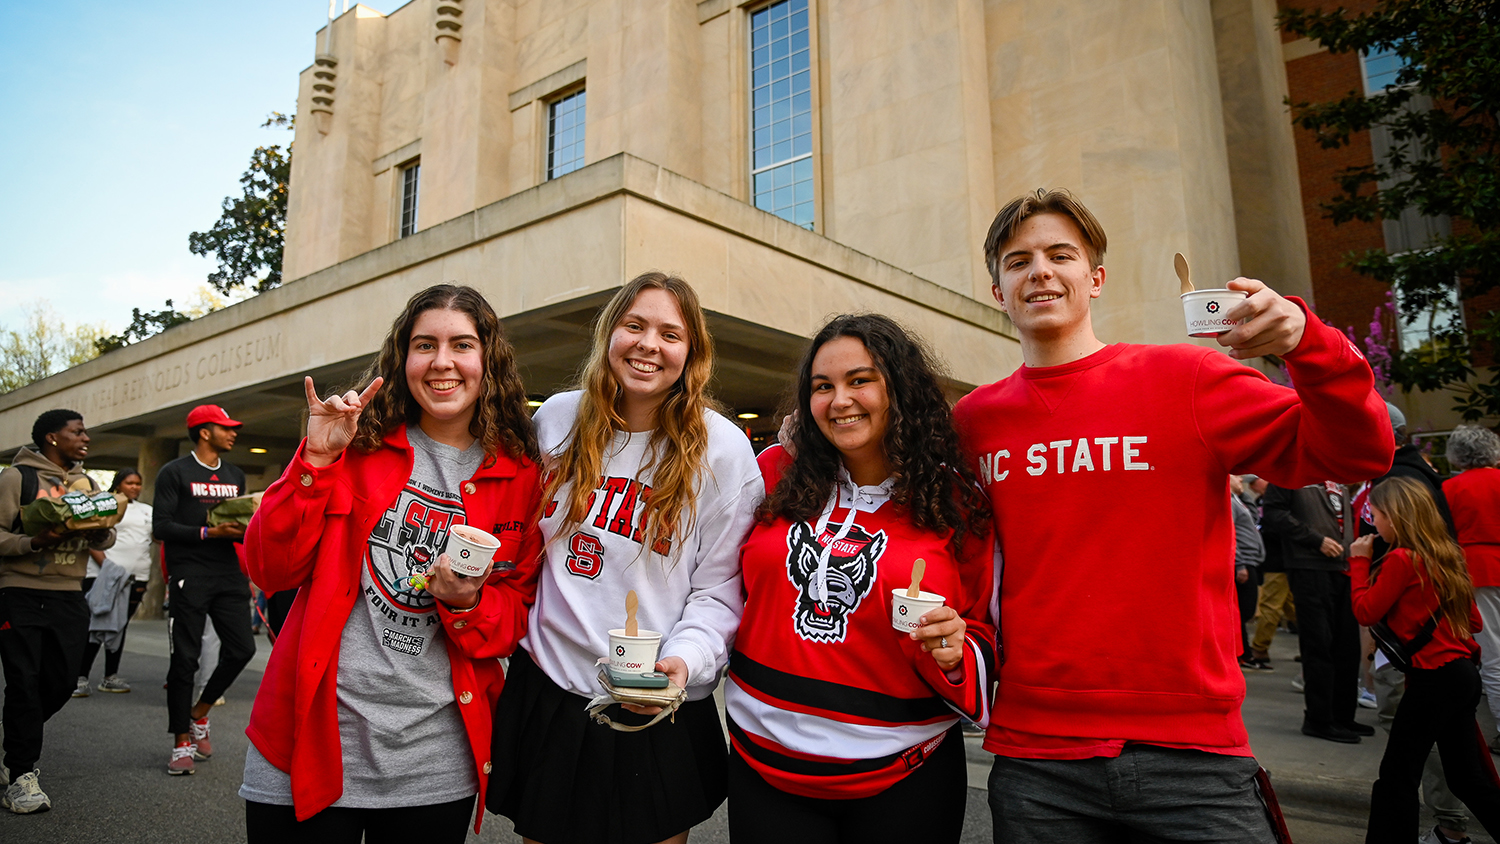 students wearing nc state shirts hold howling cow ice cream